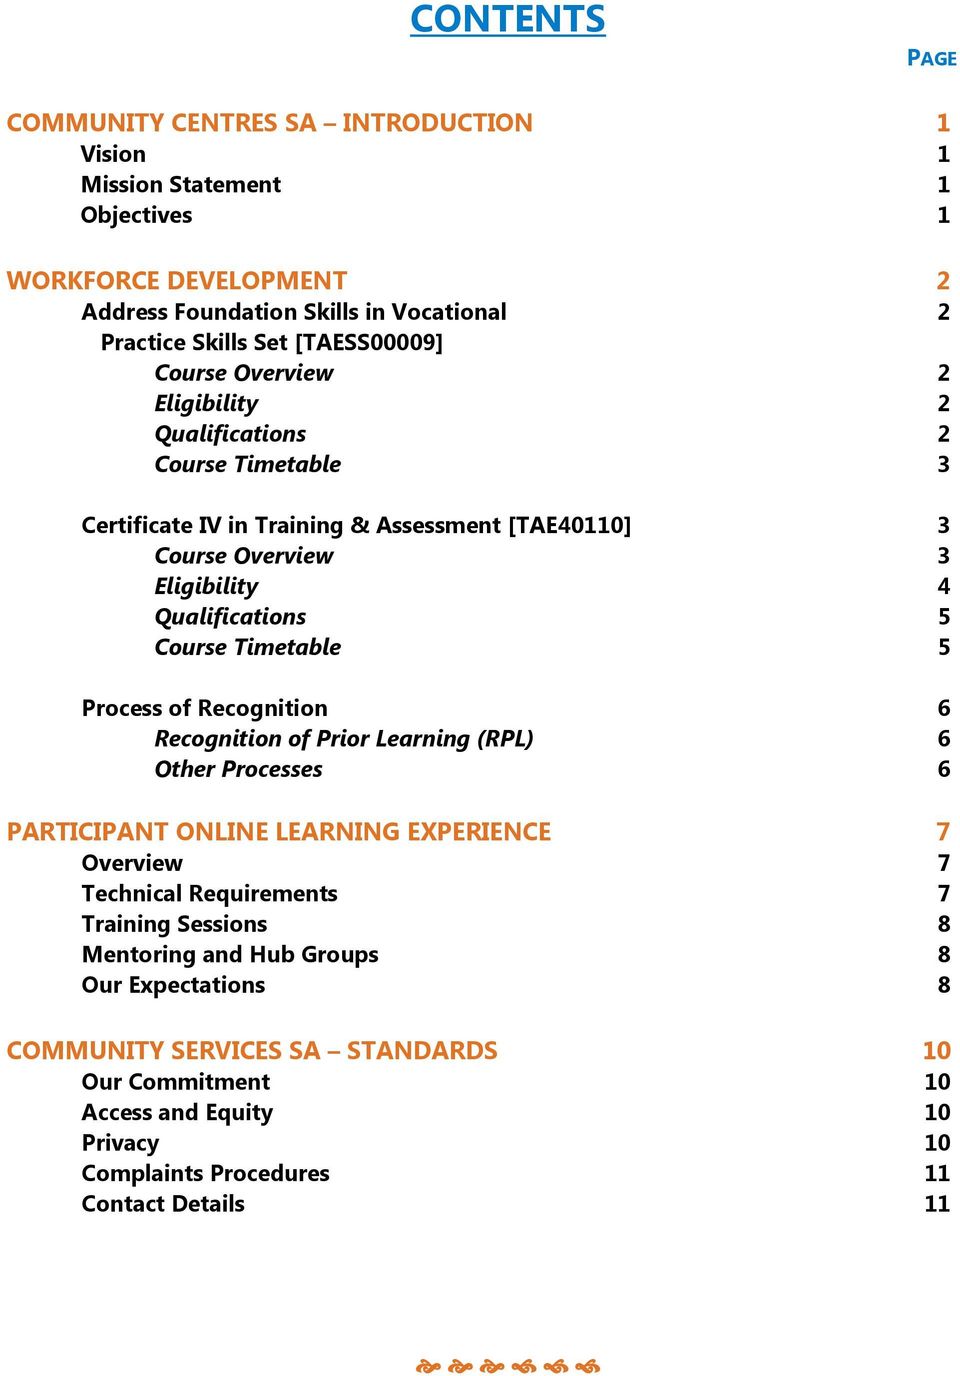 Course Timetable 5 Process of Recognition 6 Recognition of Prior Learning (RPL) 6 Other Processes 6 PARTICIPANT ONLINE LEARNING EXPERIENCE 7 Overview 7 Technical Requirements 7